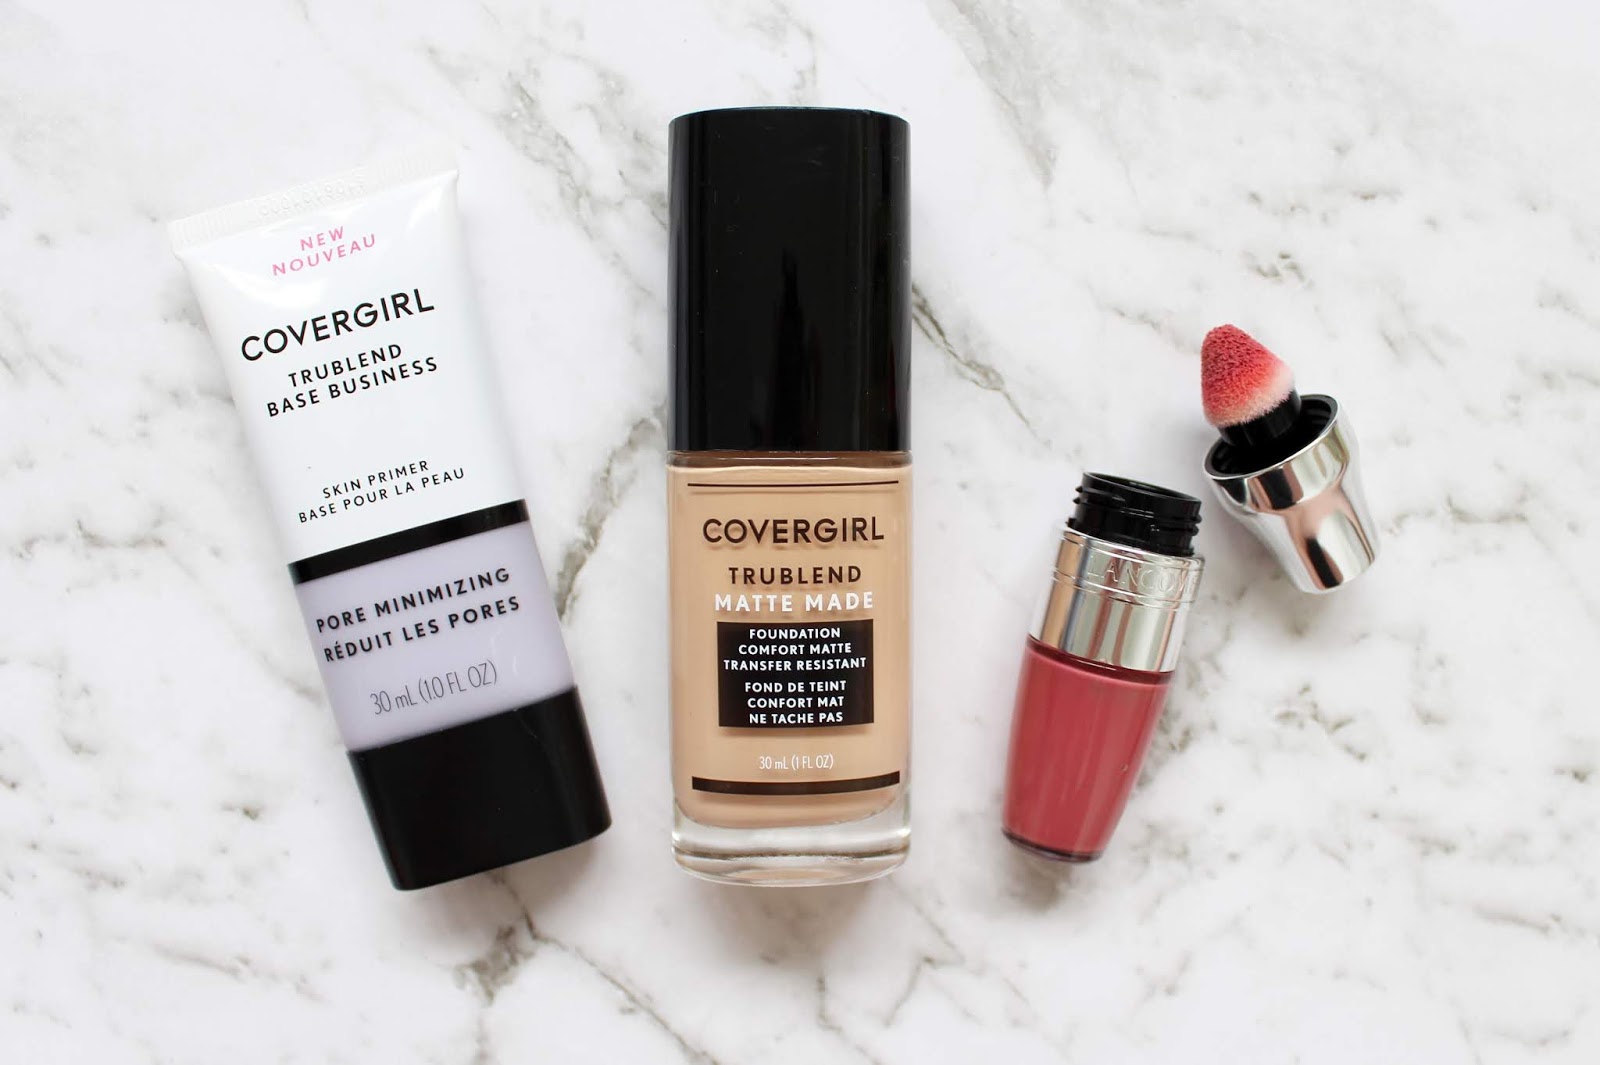 NEW IN BEAUTY HAUL | Covergirl, Marc Jacobs, Pixi + Lancome - Cassandra Myee